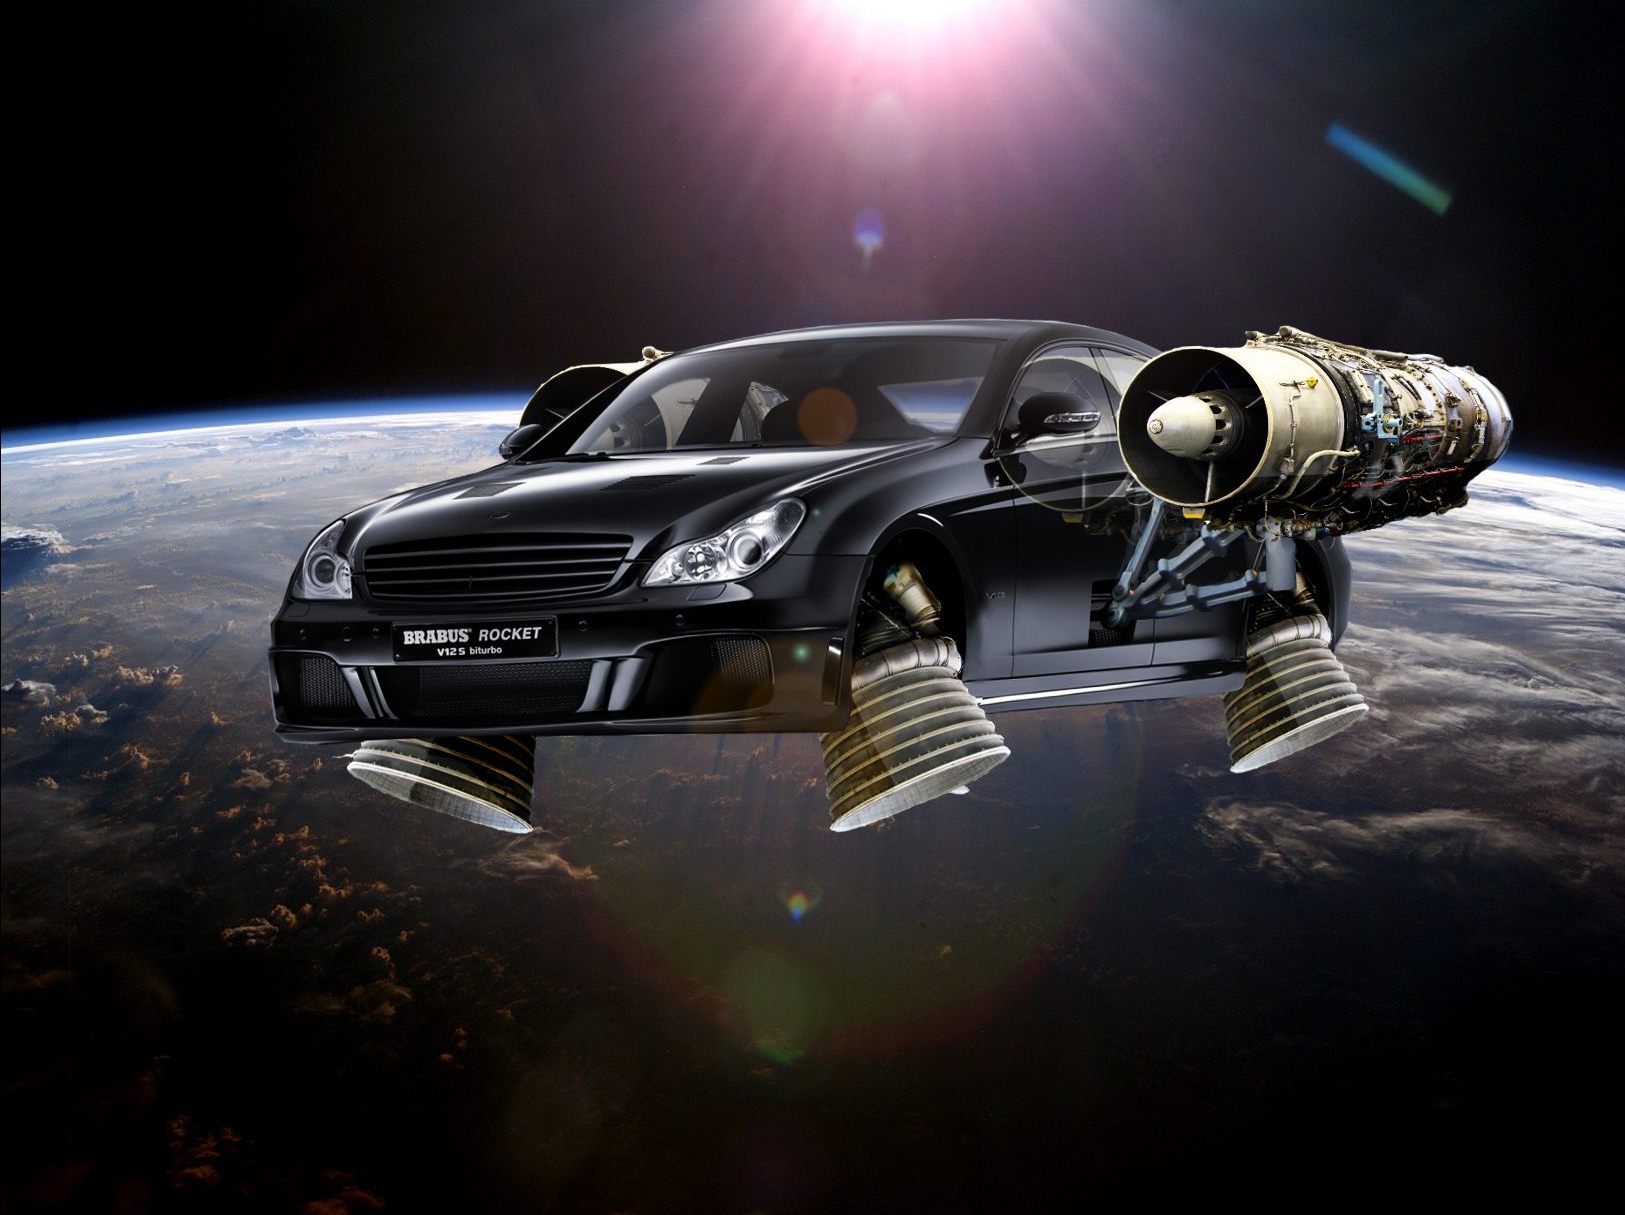 Brabus Space Car by carlosnumbertwo on DeviantArt